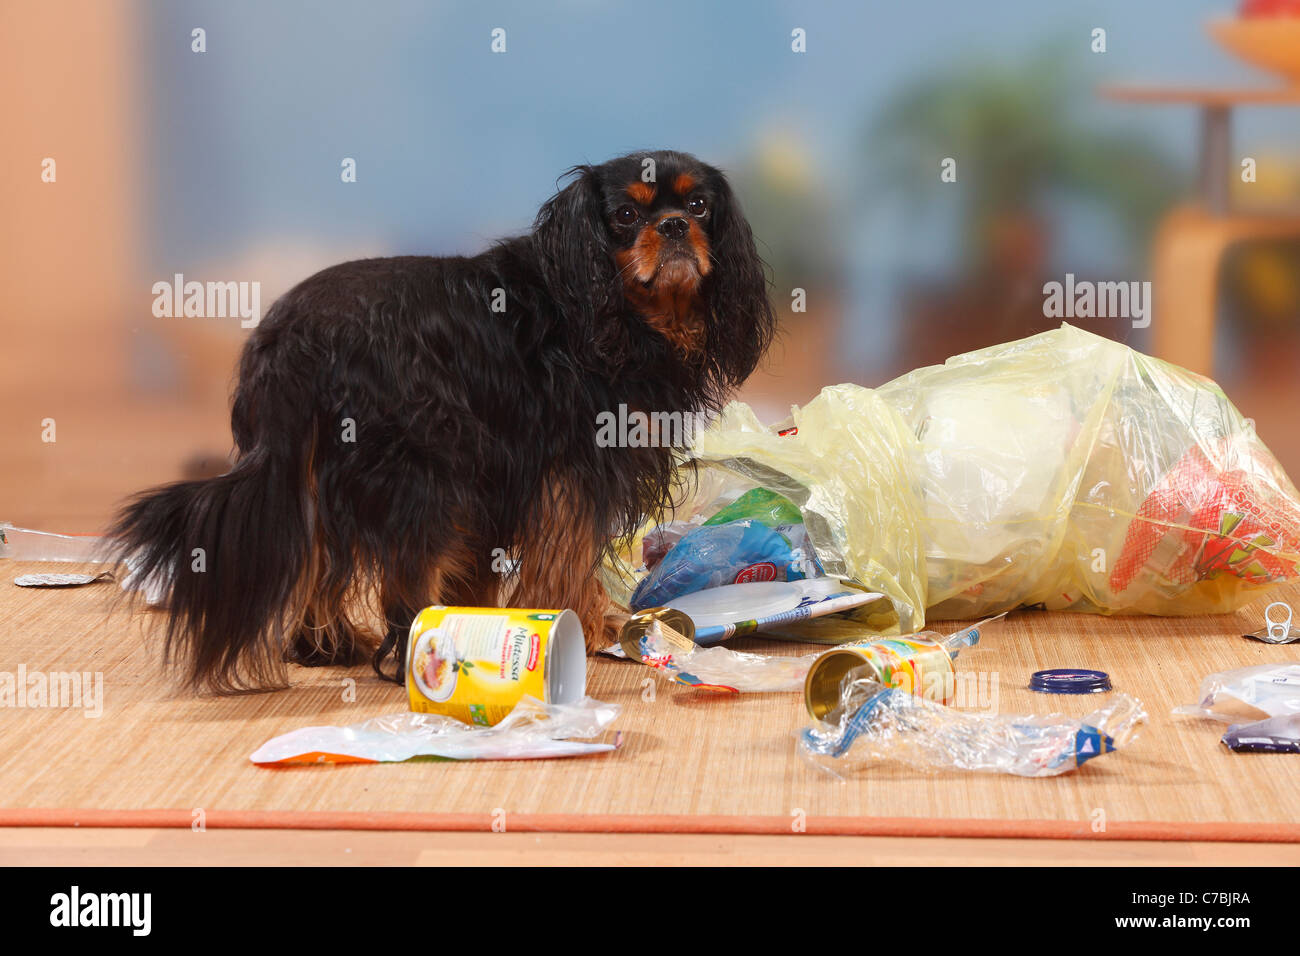 Cavalier King Charles Spaniel, black-and-tan, scavenging rubbish / garbage, caught in the act Stock Photo